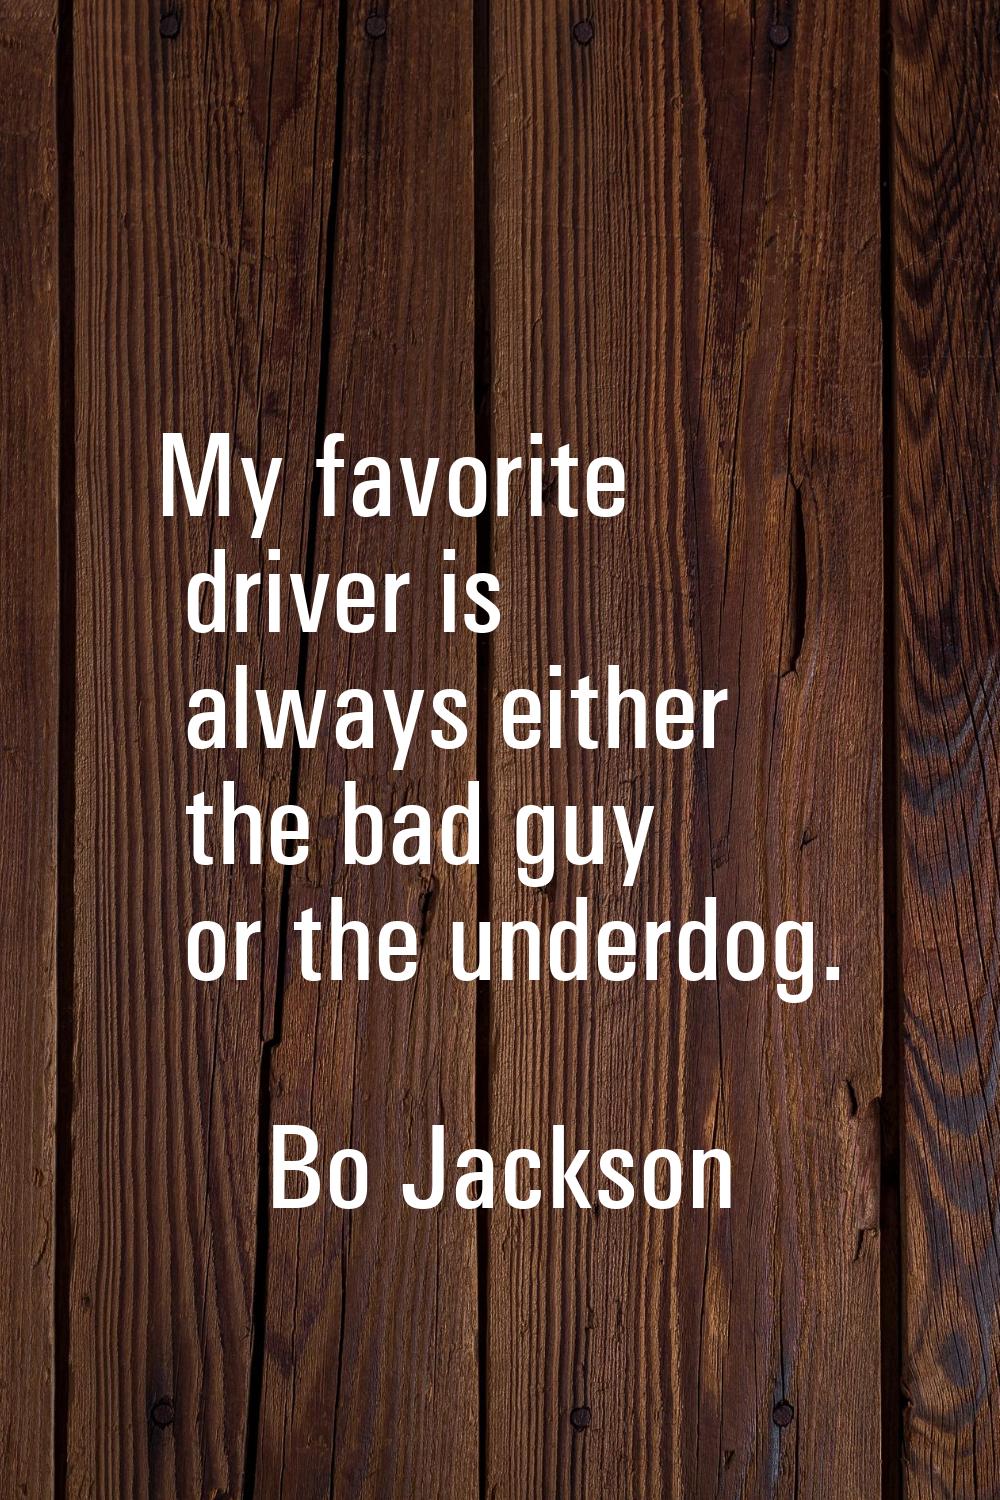 My favorite driver is always either the bad guy or the underdog.